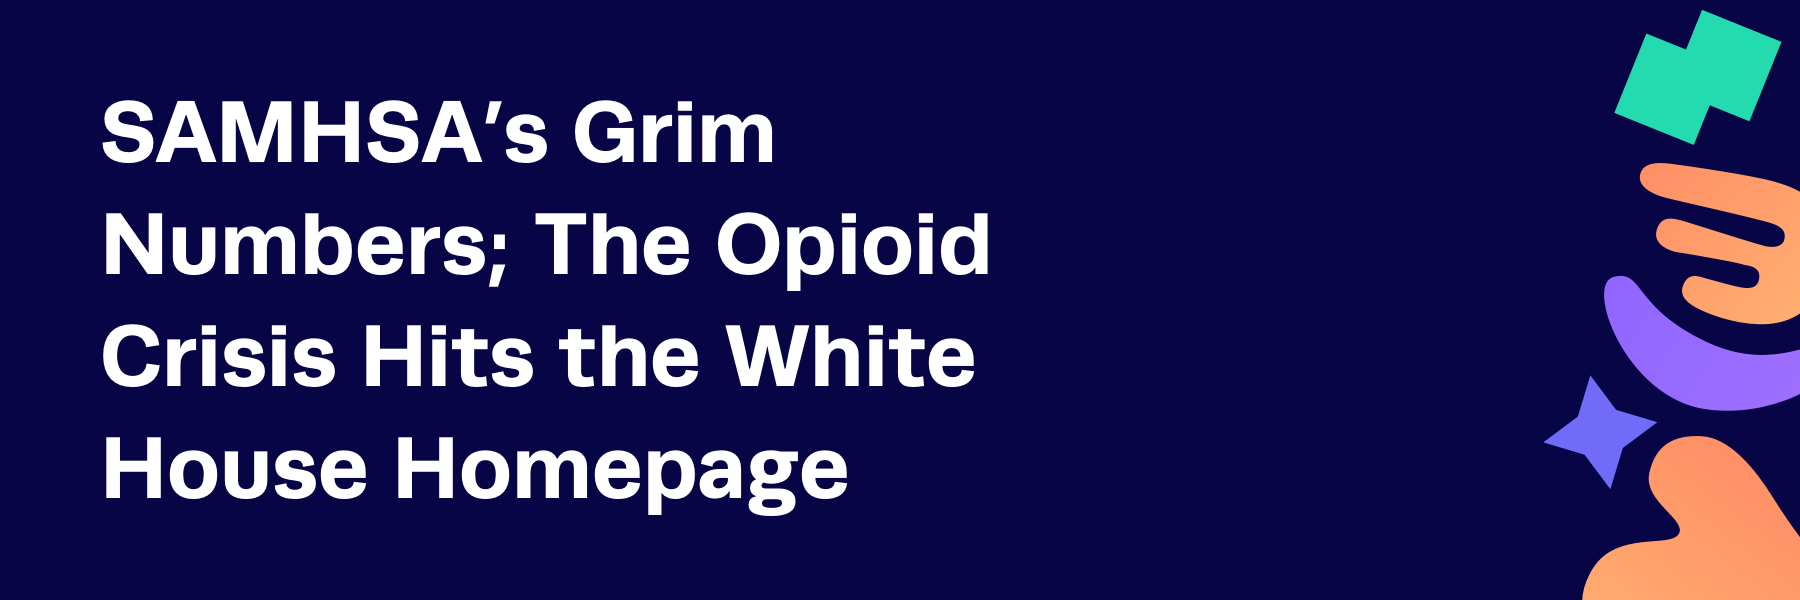 SAMHSA’s Grim Numbers; The Opioid Crisis Hits the White House Homepage